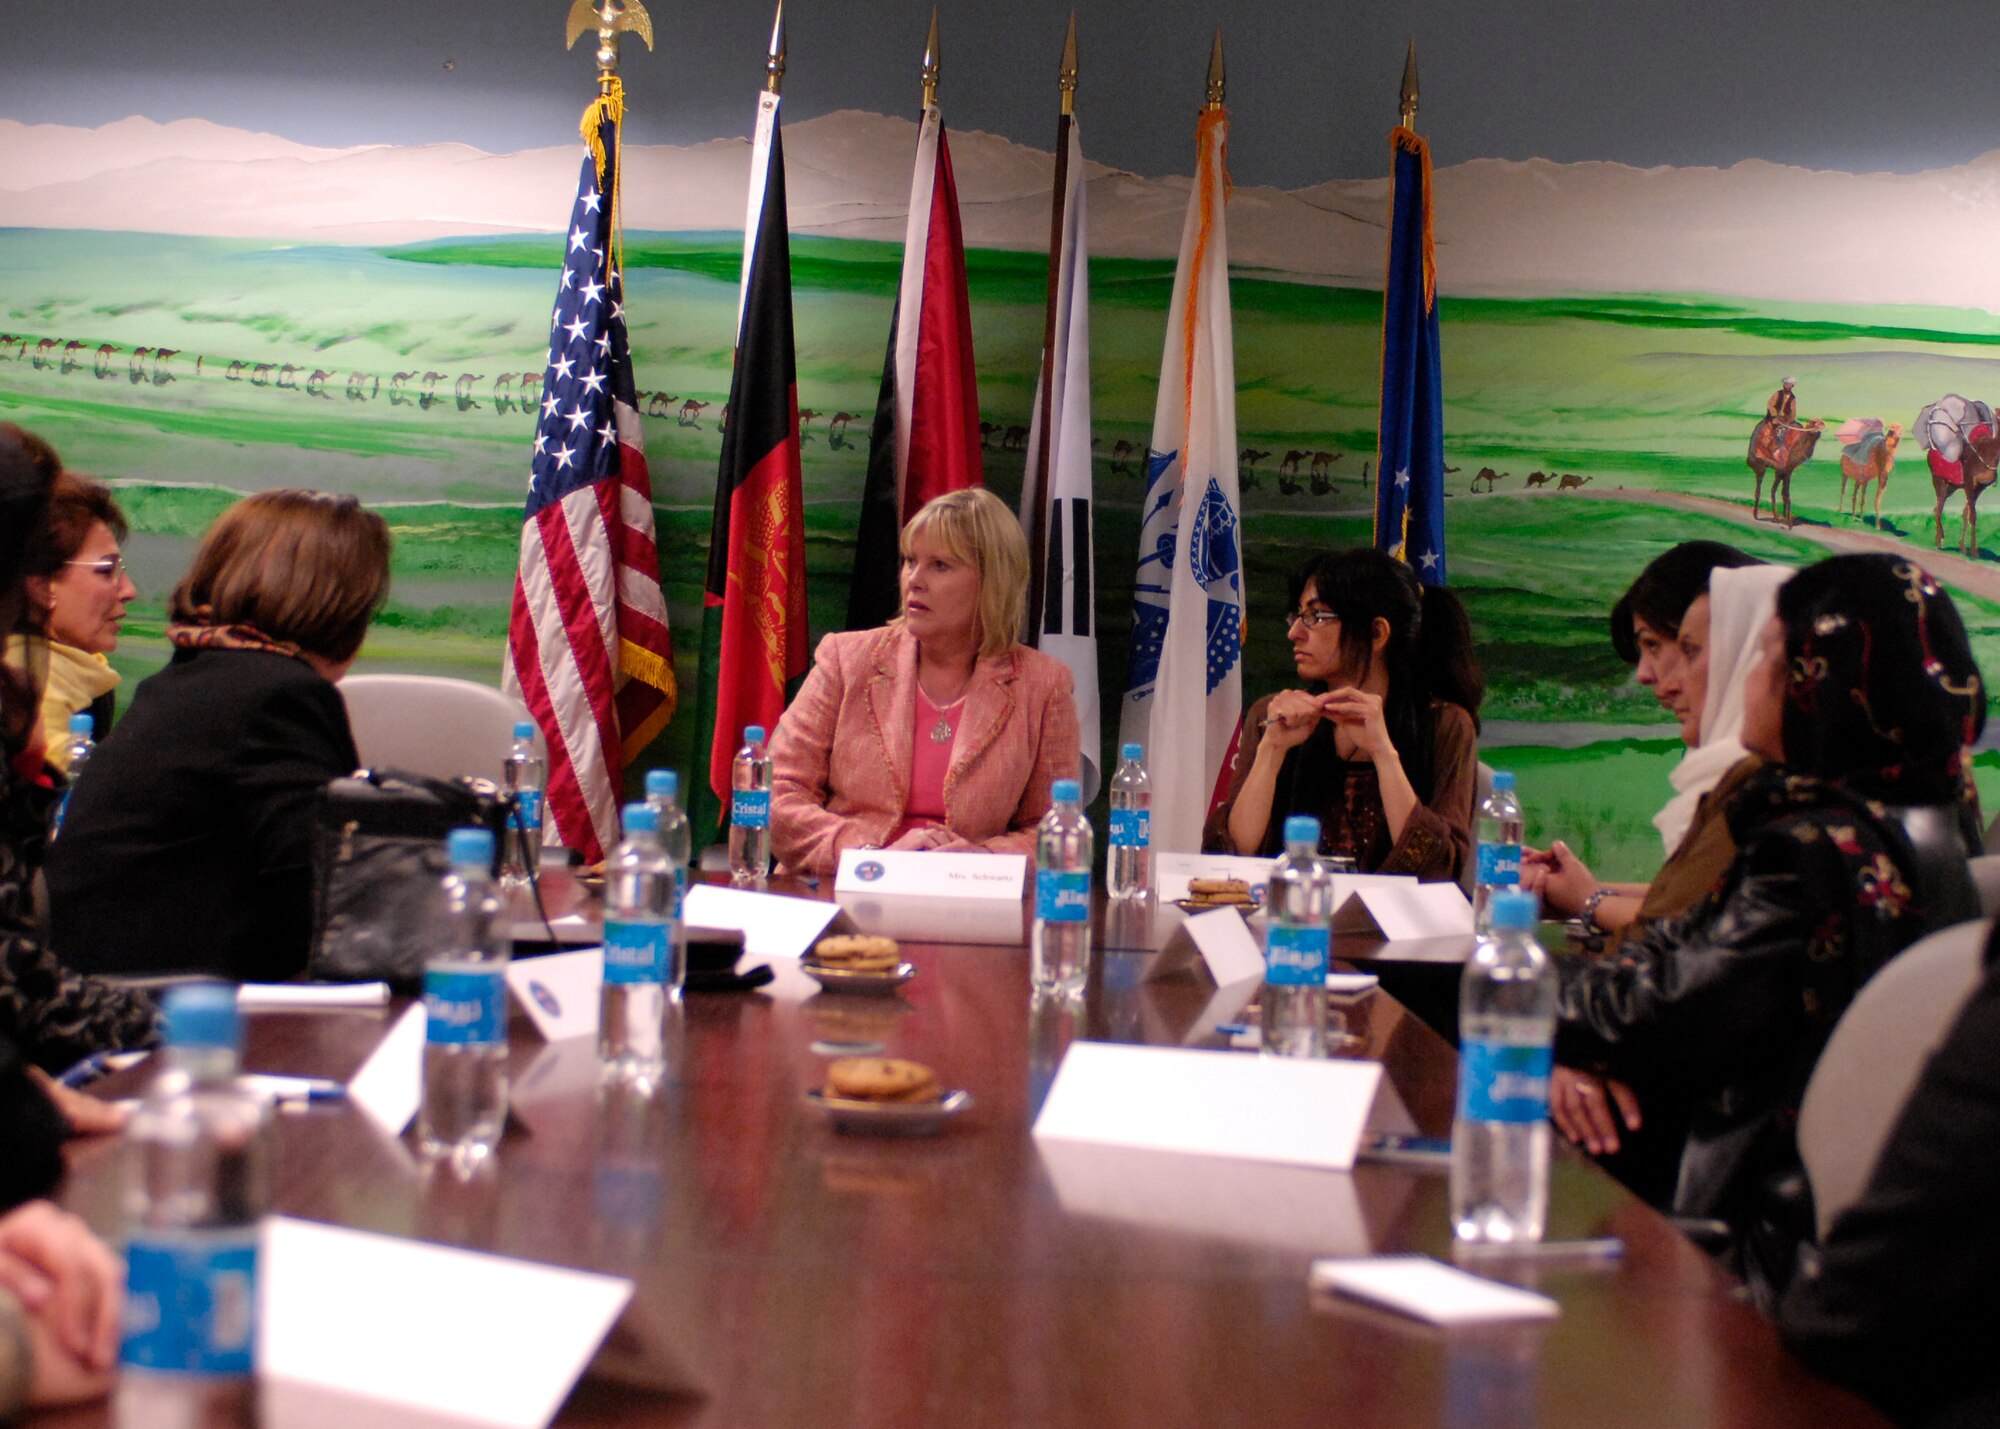 BAGRAM AIR FIELD, Afghanistan – Prominent Afghan women from Kabul, Kapisa and Parwan provinces discuss women’s affairs in Afghanistan with Suzie Schwartz, wife of Gen. Norton Schwartz, U.S. Transportation Command commander. (U.S. Air Force photo by Master Sgt. Demetrius Lester)